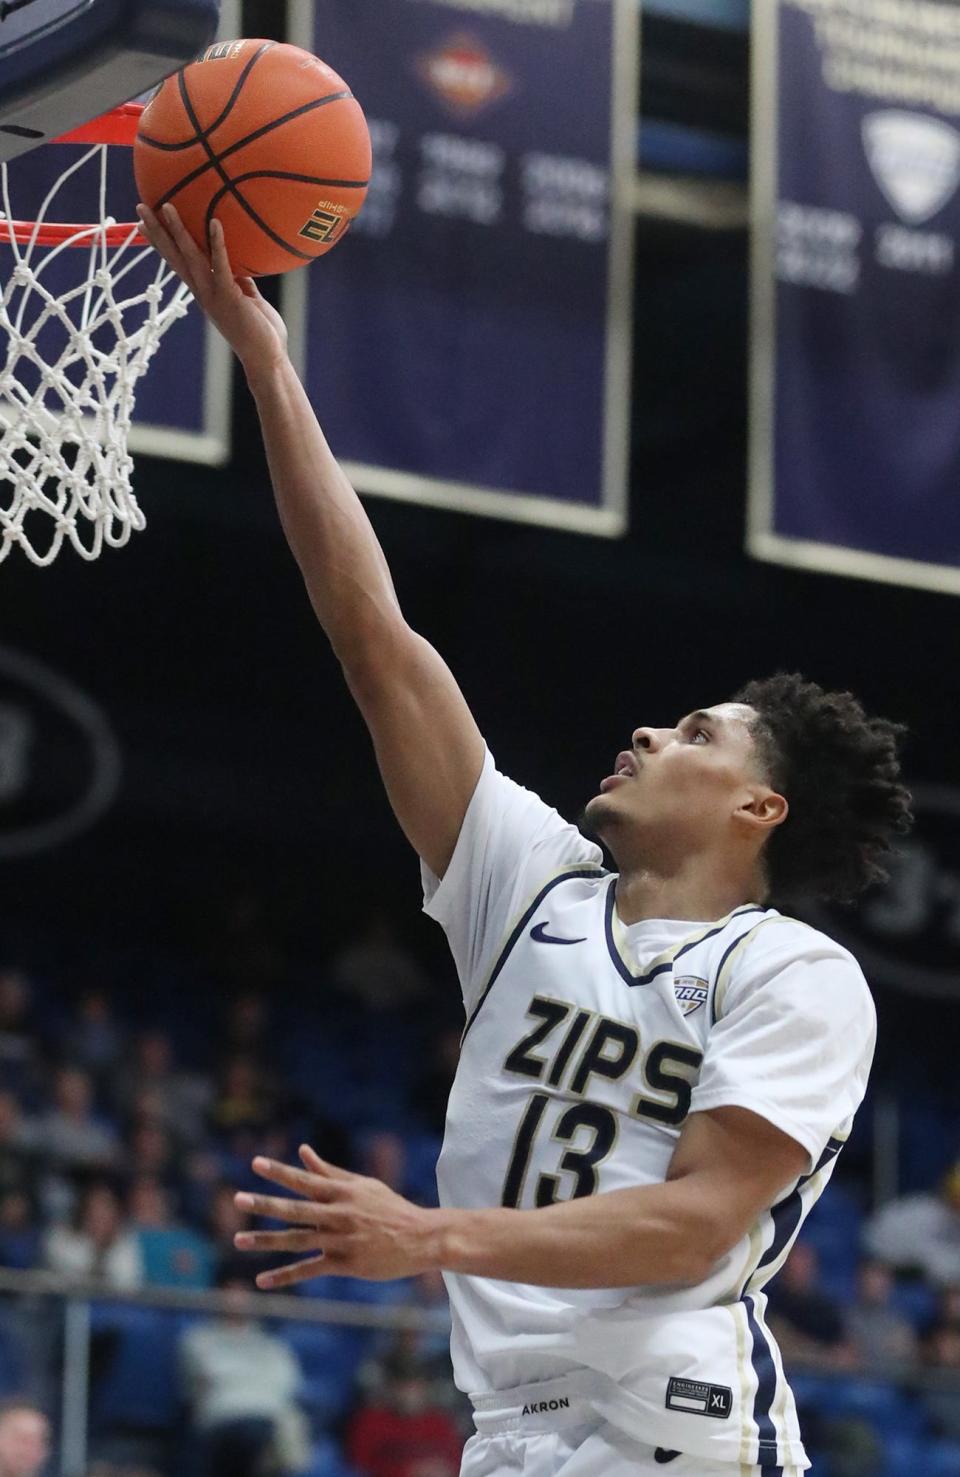 Akron's Xavier Castaneda, scoring against Eastern Michigan earlier this season, has scored 32 points in two straight games.